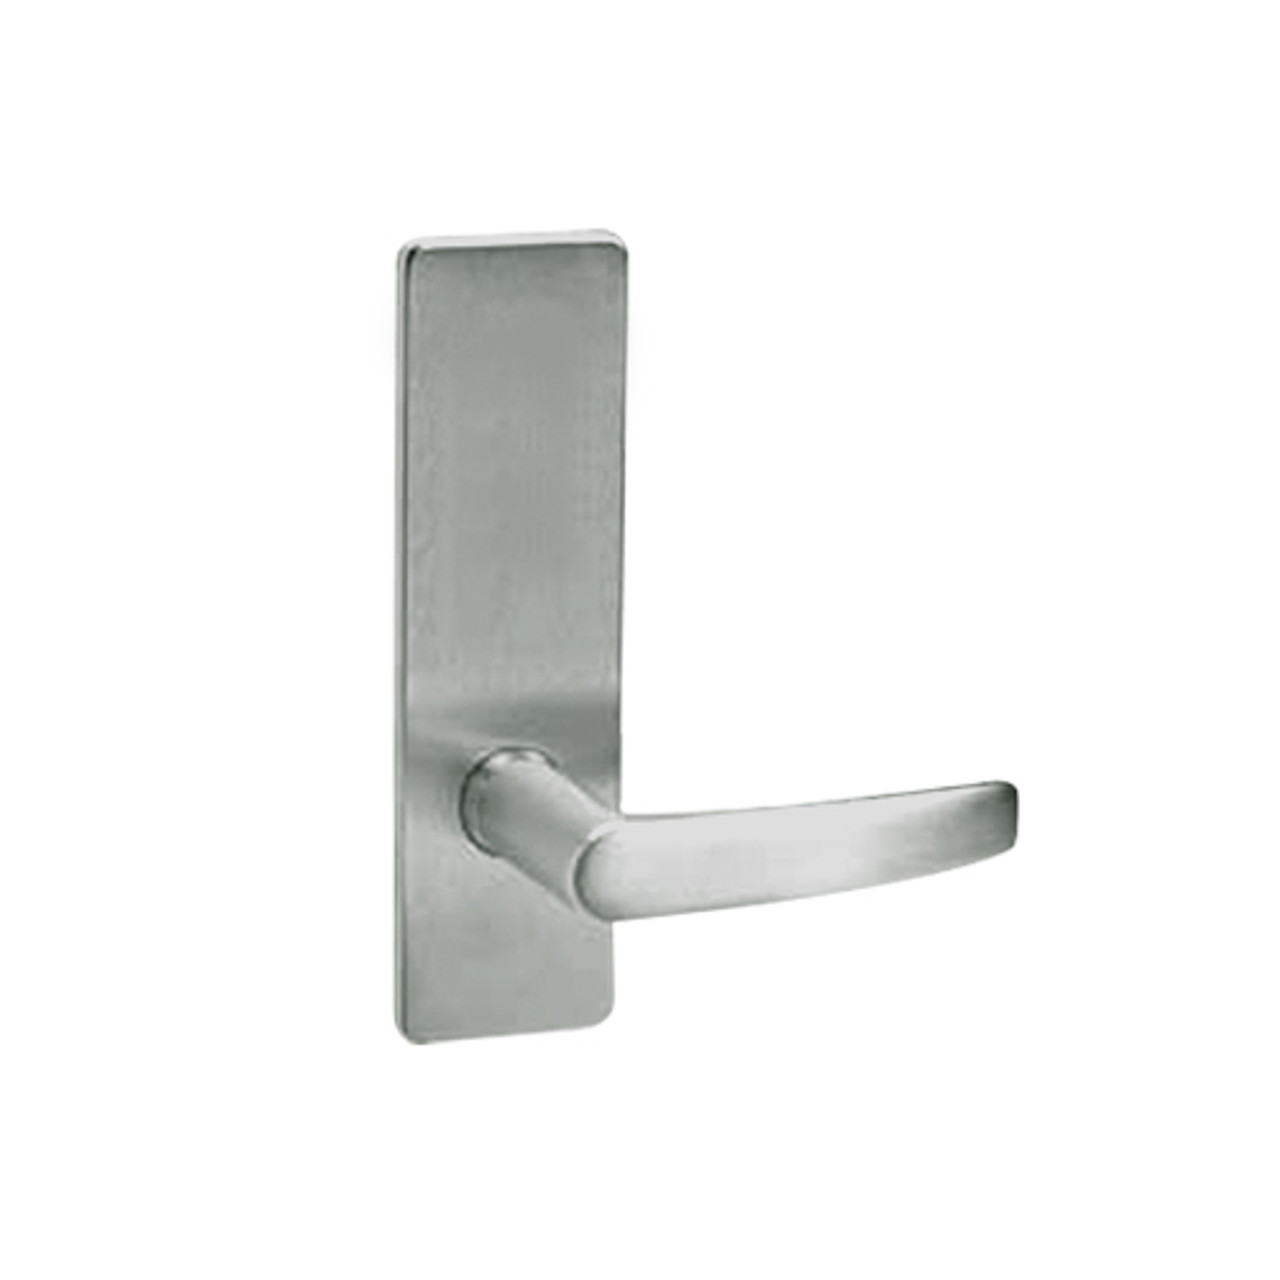 ML2010-ASN-619 Corbin Russwin ML2000 Series Mortise Passage Locksets with Armstrong Lever in Satin Nickel